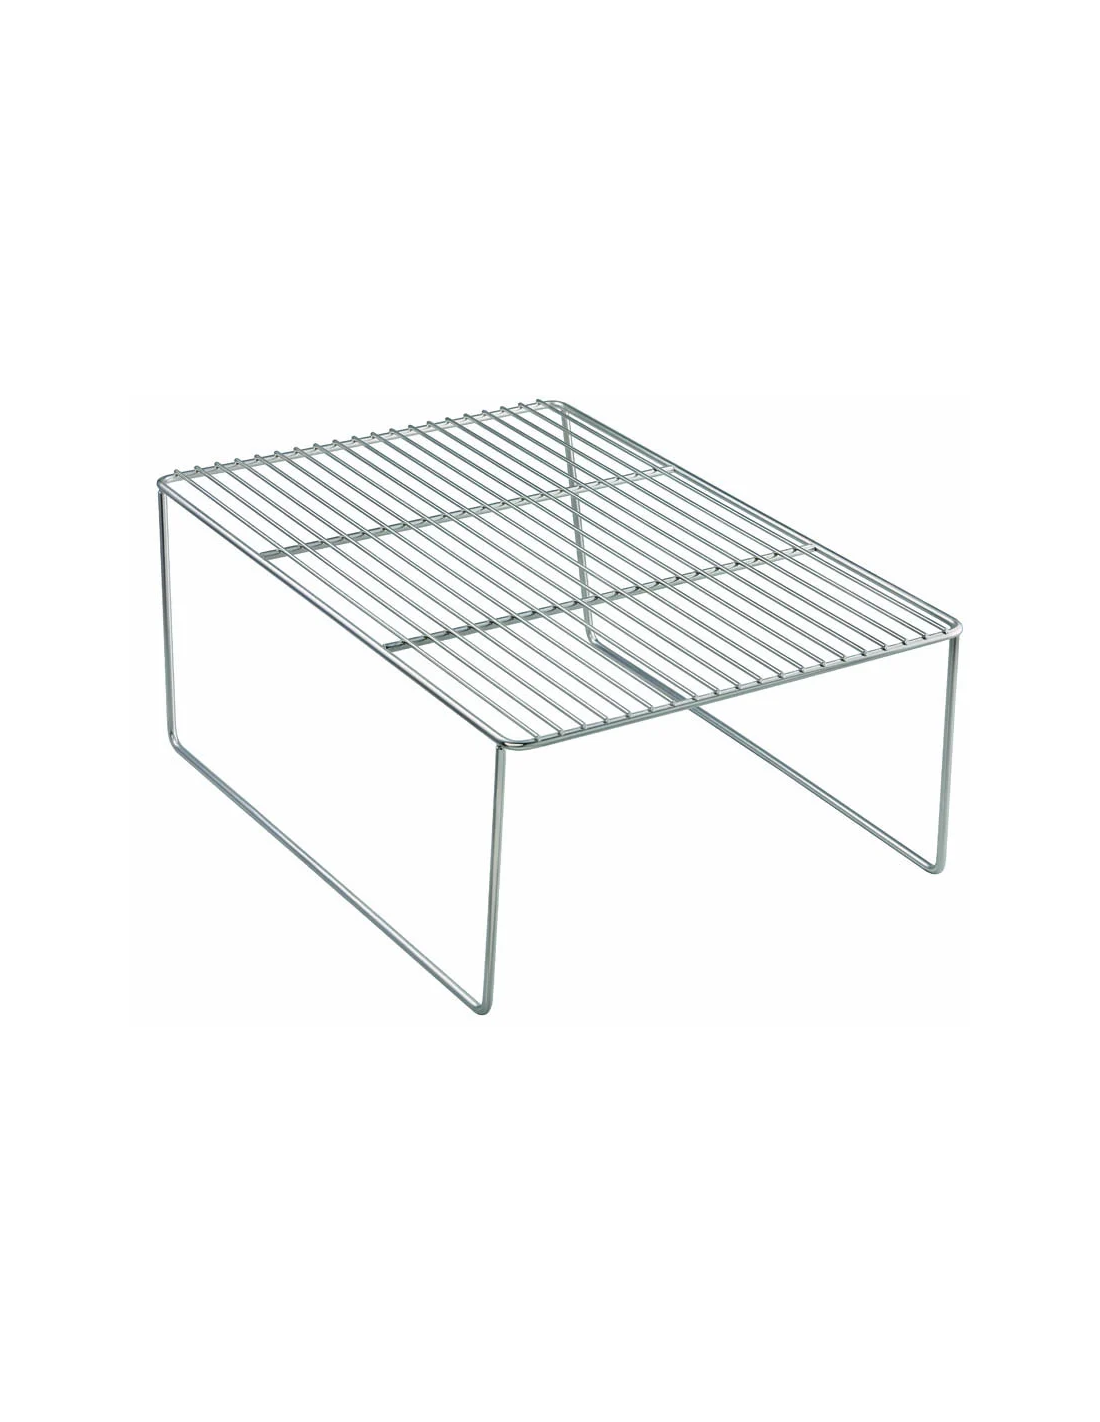 Self-supporting grate in stainless steel